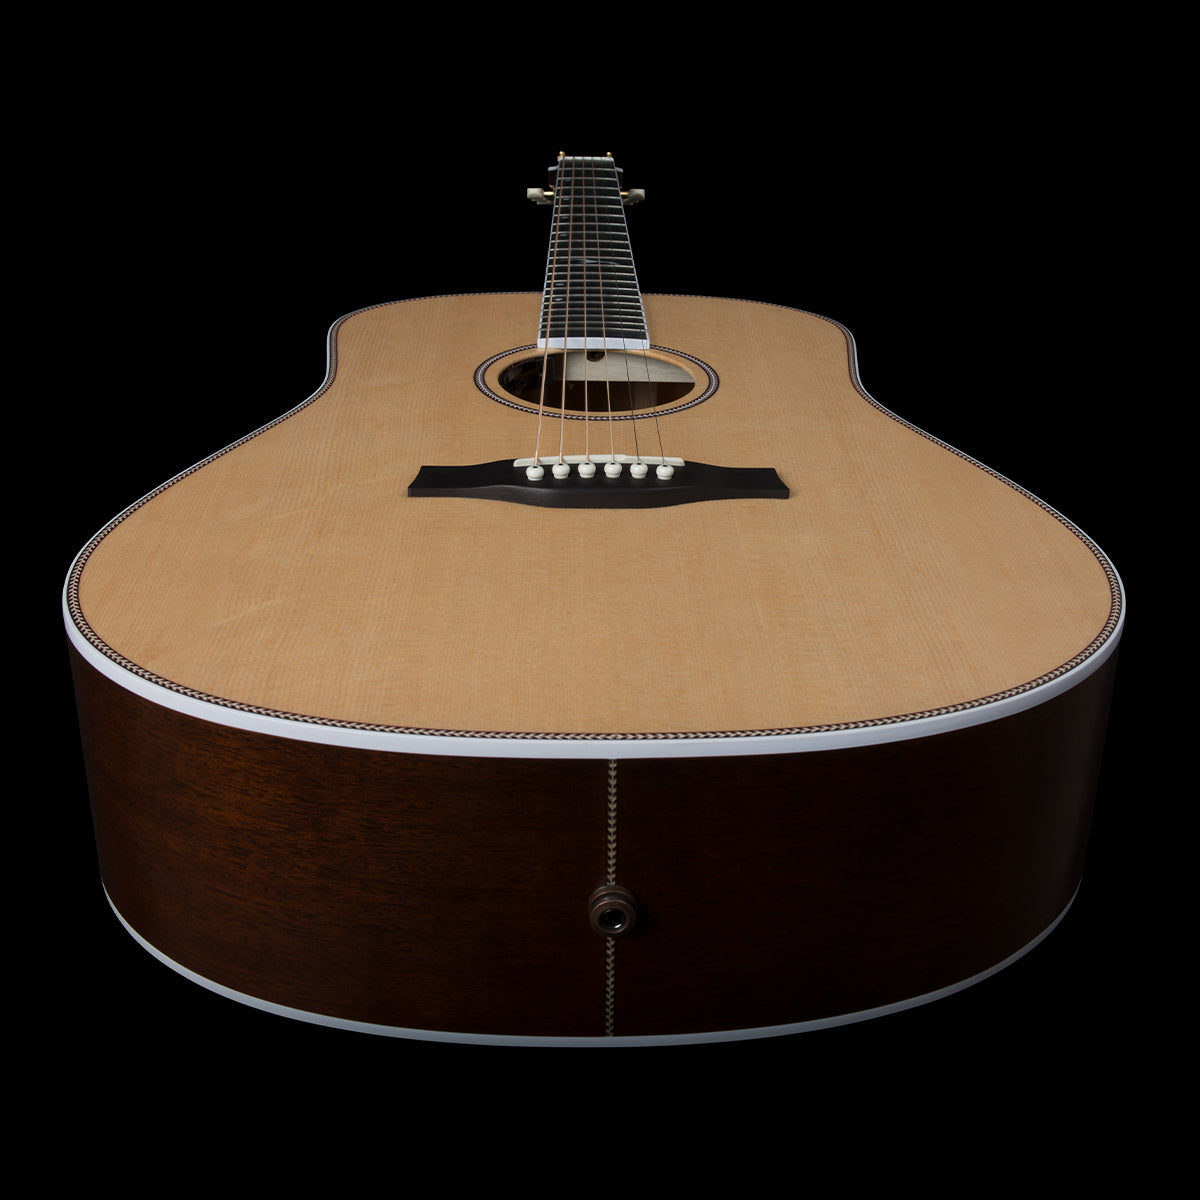 Seagull Artist Mosaic Anthem Electro-Acoustic Guitar ~ Natural with Bag,  for sale at Richards Guitars.